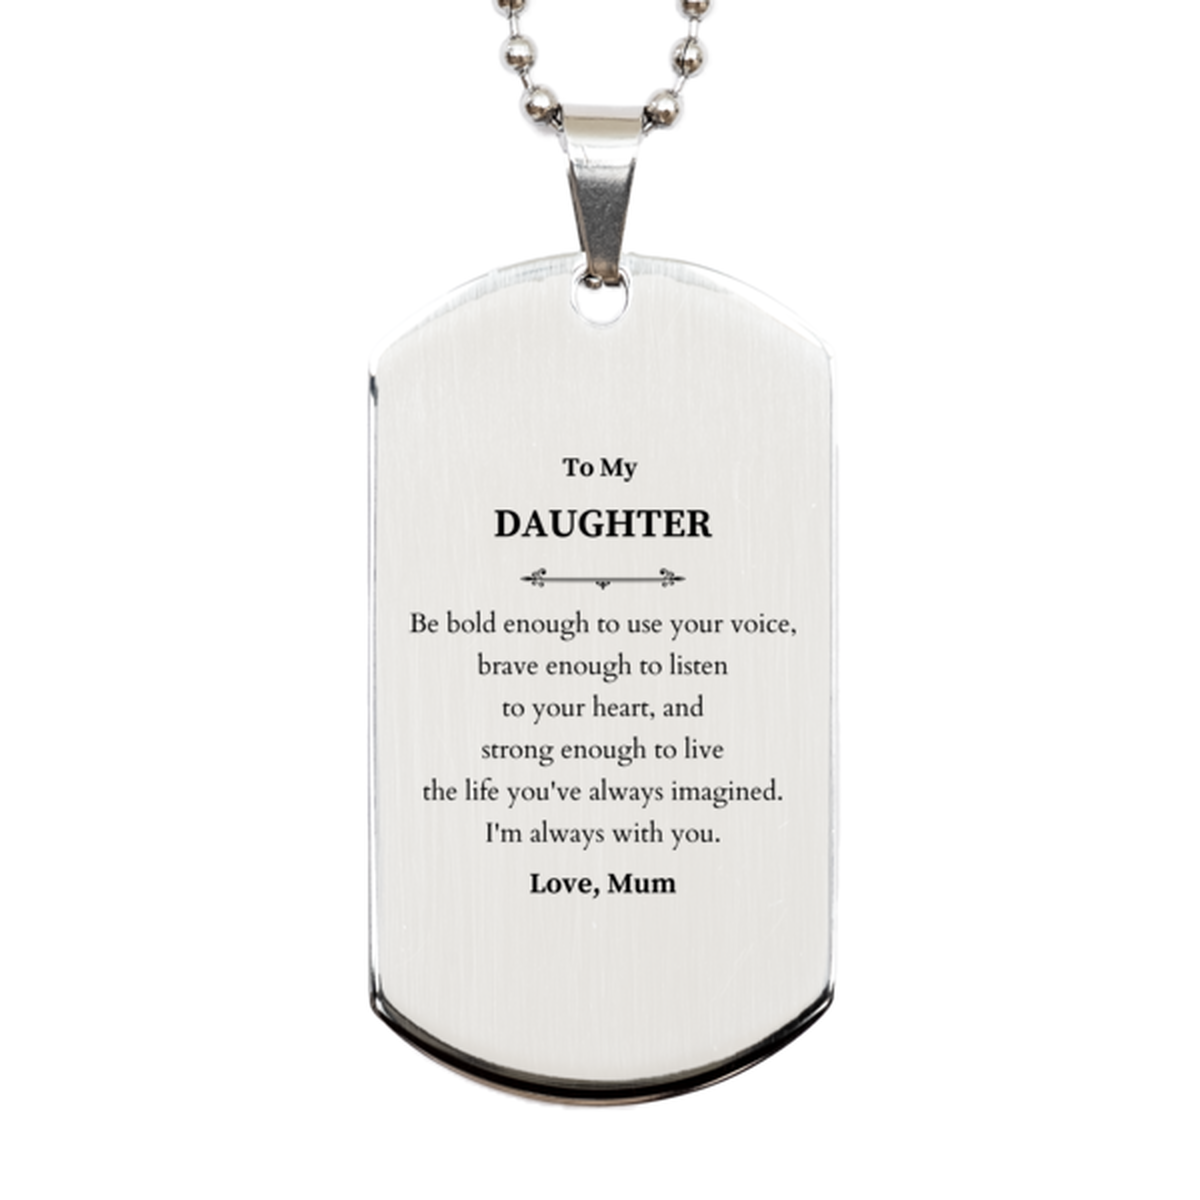 Keepsake Daughter Silver Dog Tag Gift Idea Graduation Christmas Birthday Daughter from Mum, Daughter Be bold enough to use your voice, brave enough to listen to your heart. Love, Mum